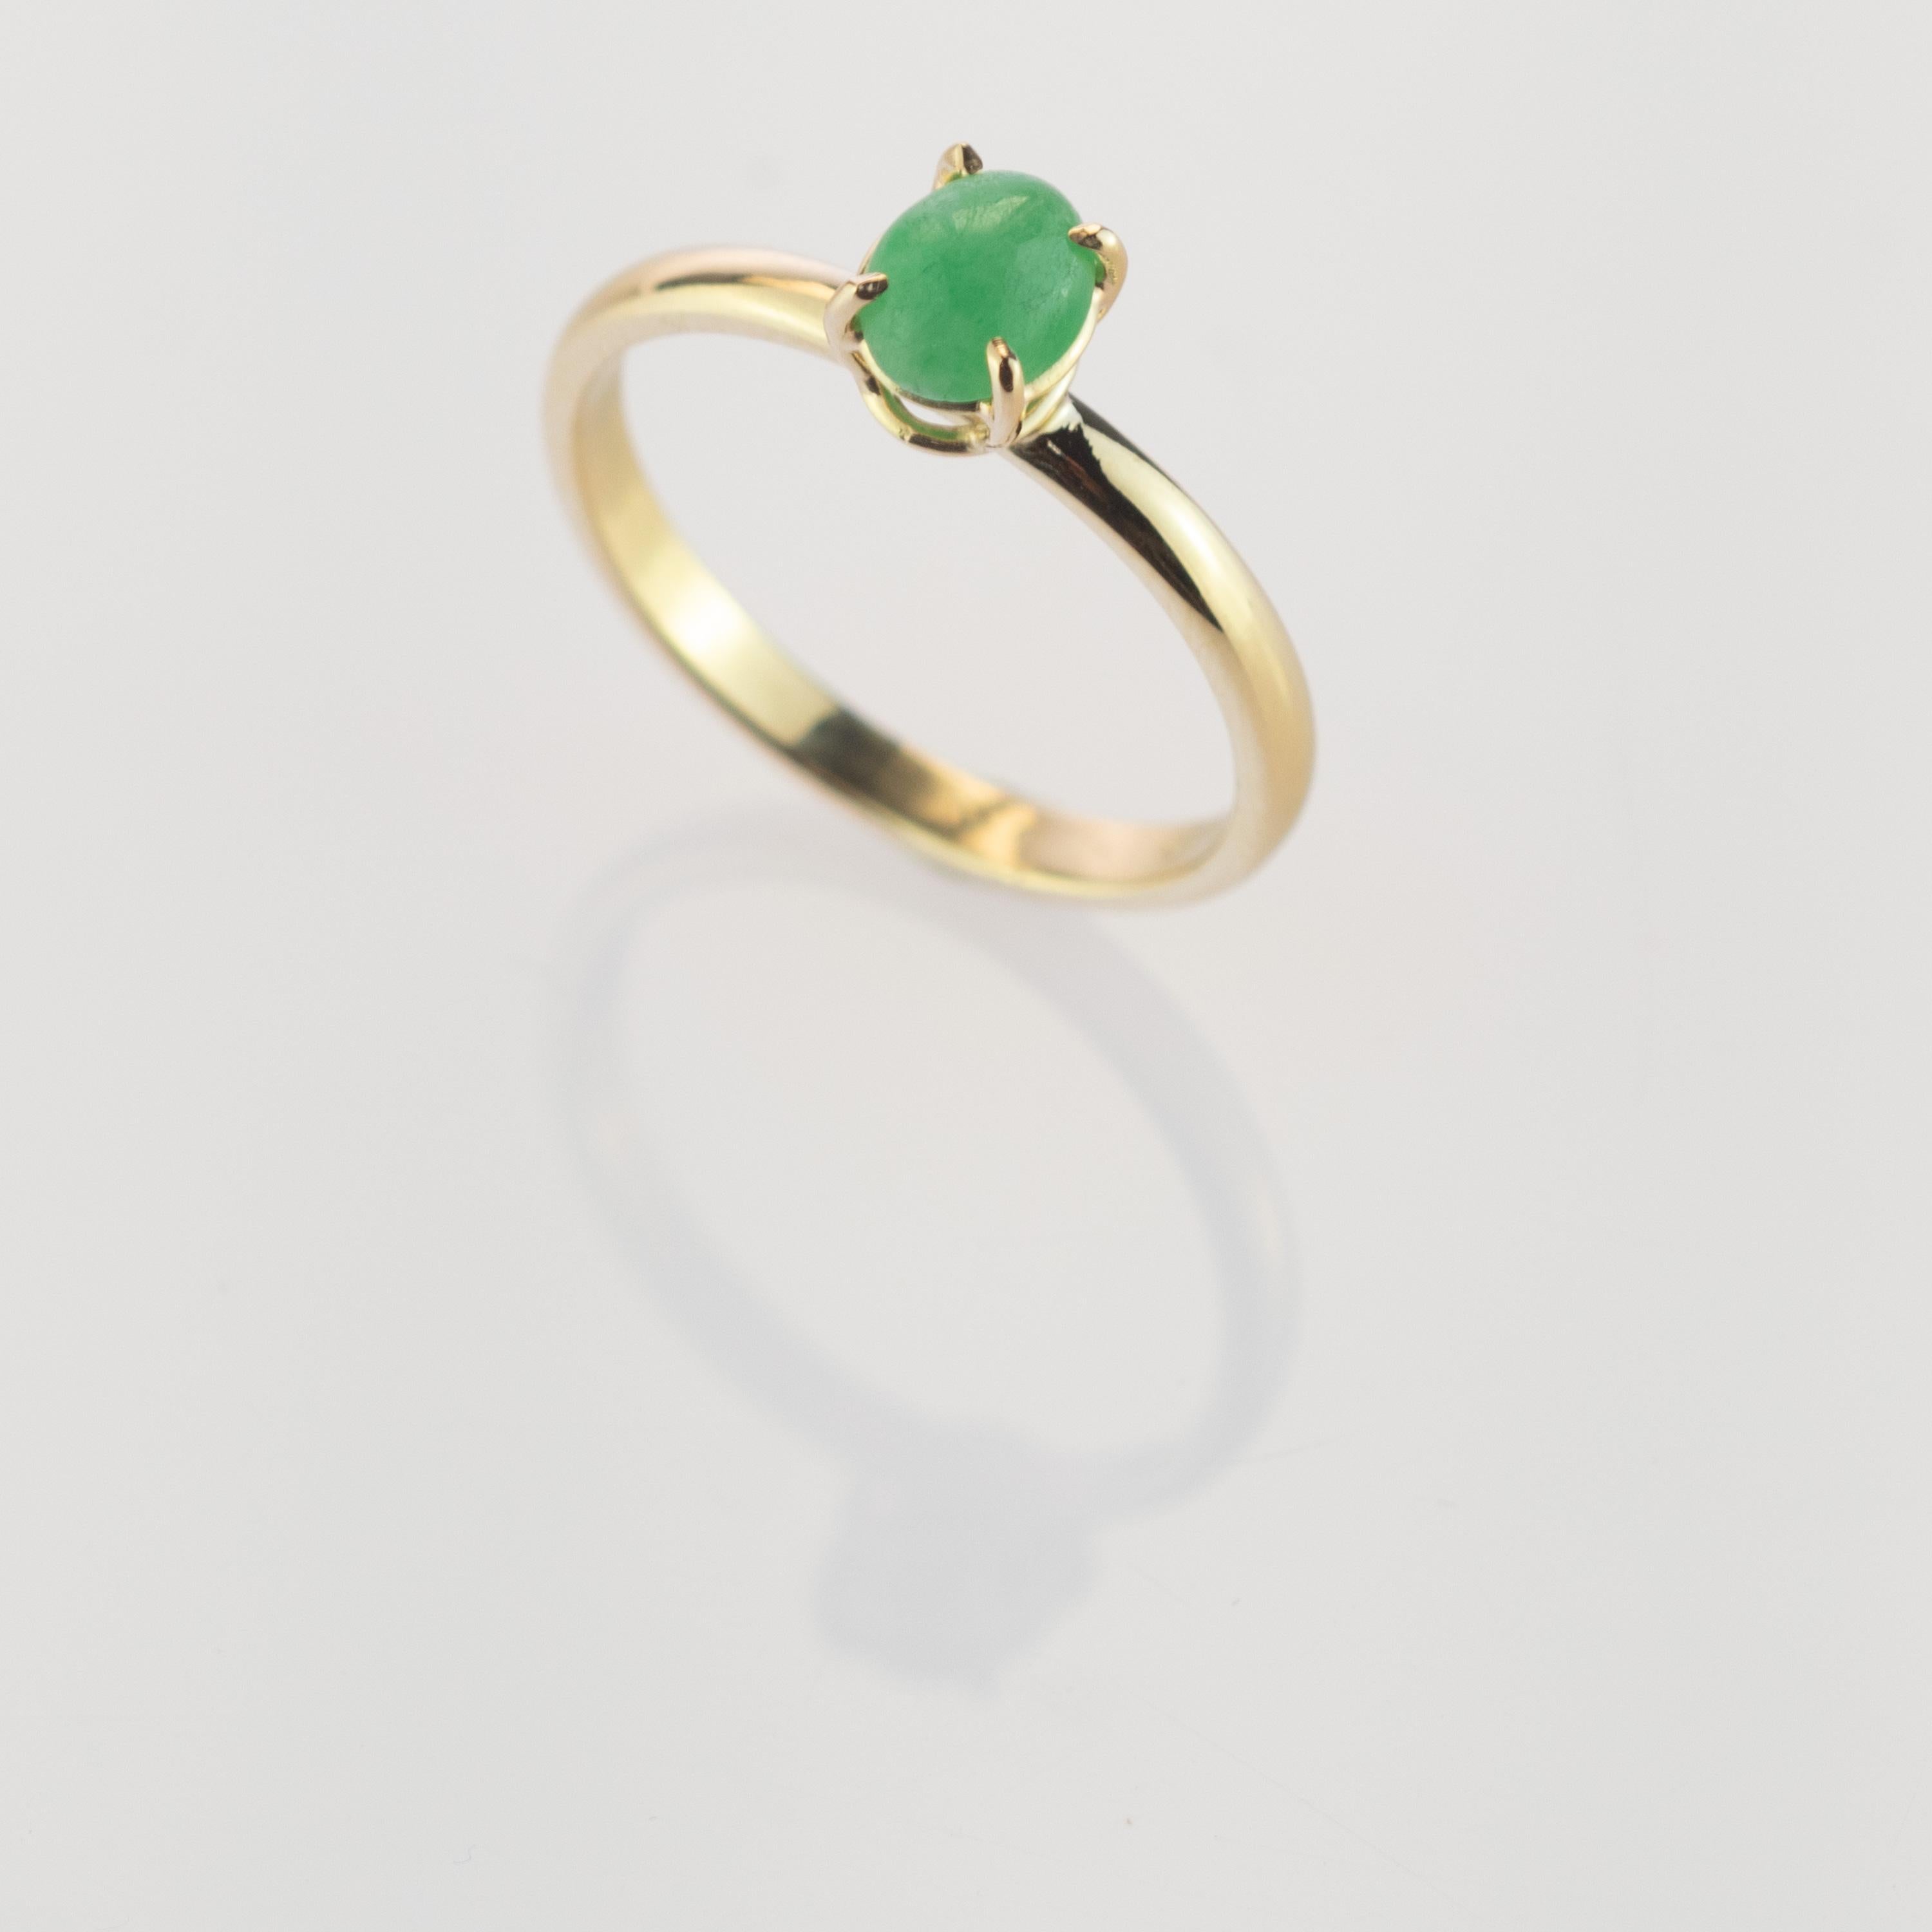 Intini Jewels 0.5 Carat Green Jade 18 Karat Yellow Gold Cocktail Chic Oval Ring For Sale 4